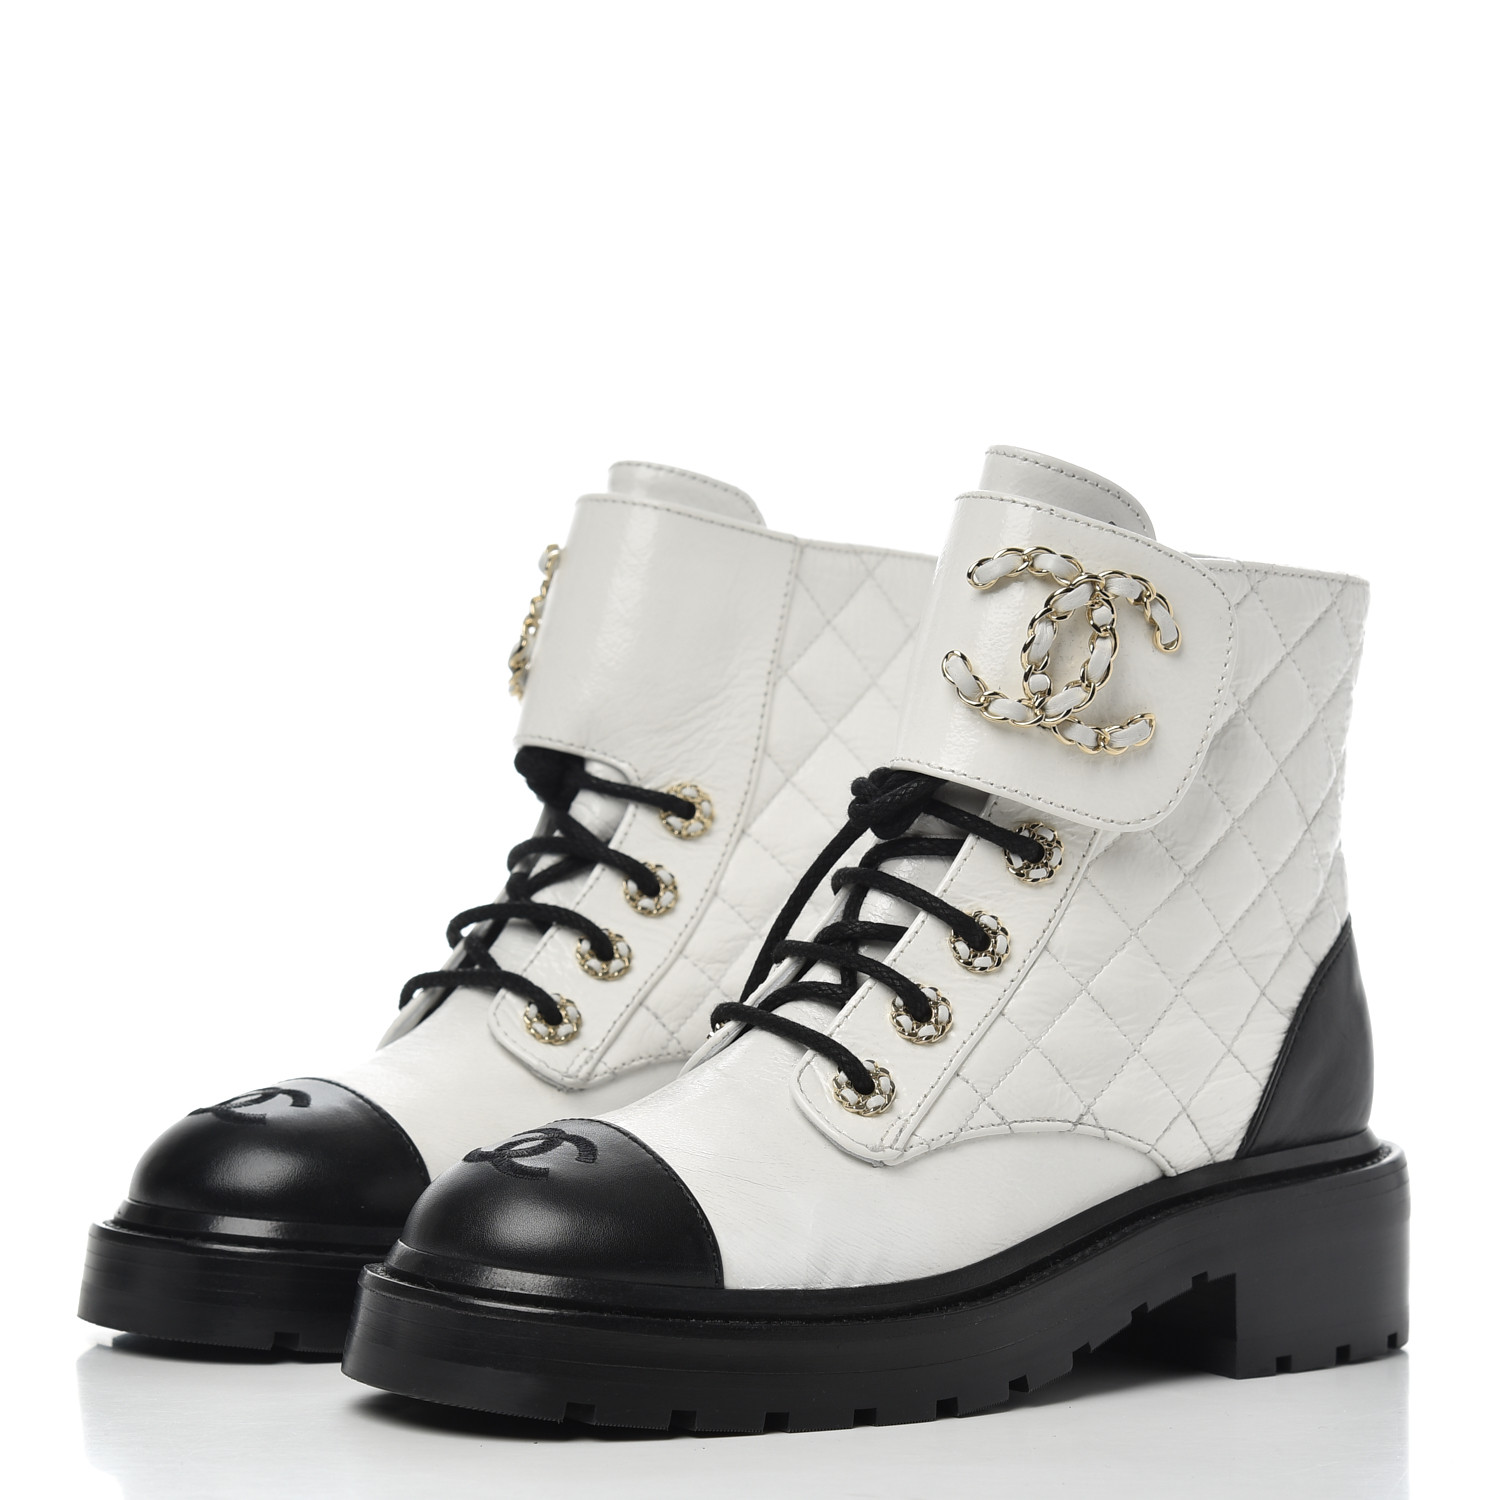 CHANEL Shiny Goatskin Calfskin Quilted Lace Up Combat Boots 36 White Black 772093 | FASHIONPHILE